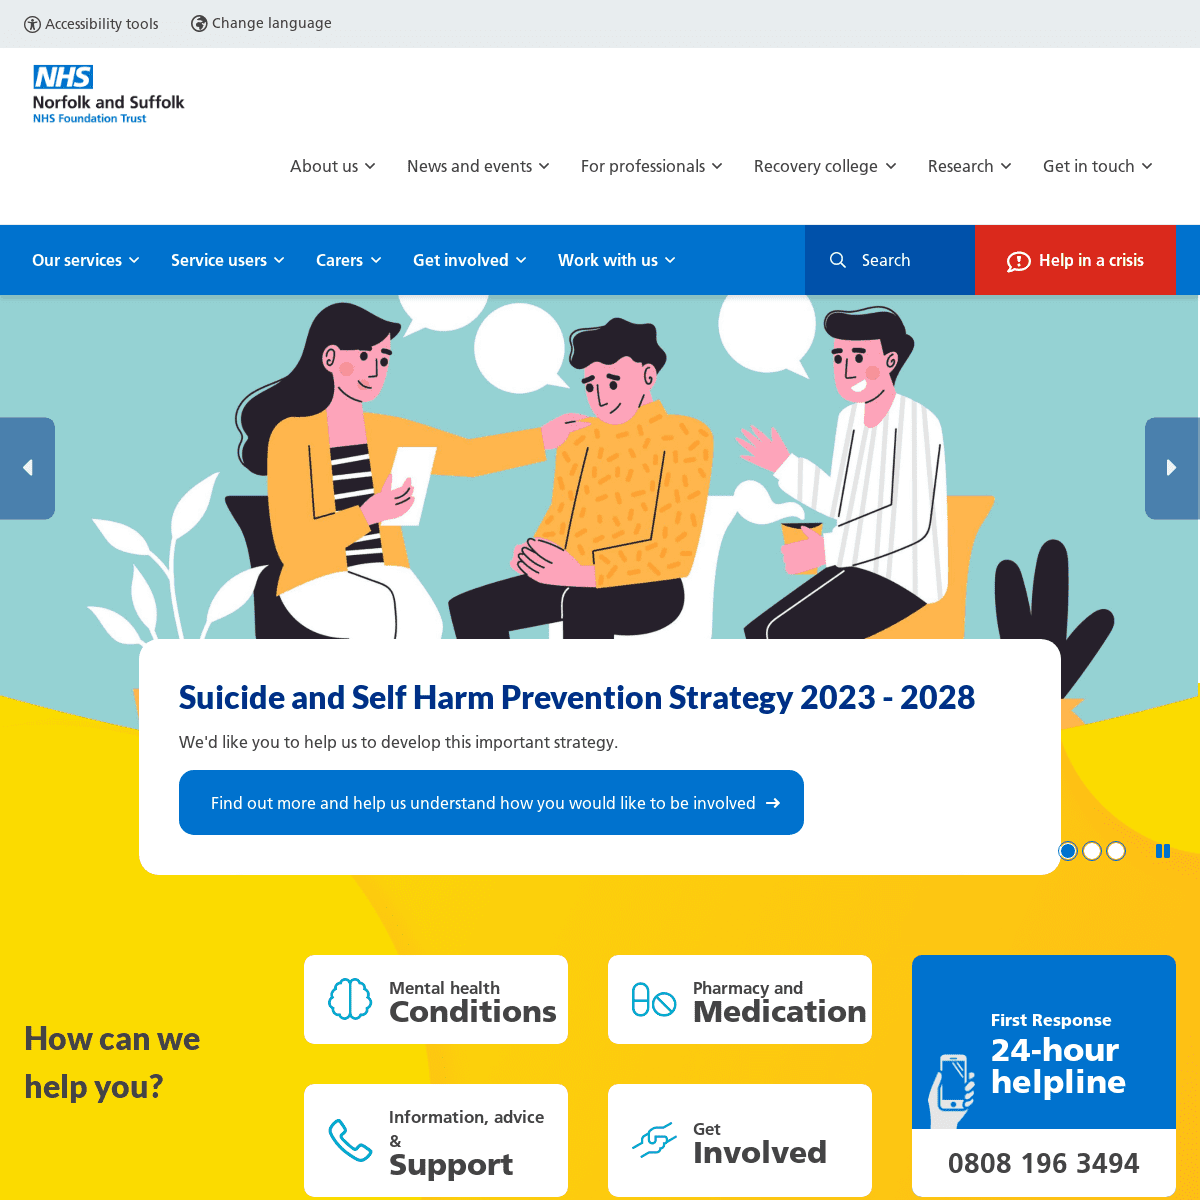 A complete backup of https://nsft.nhs.uk